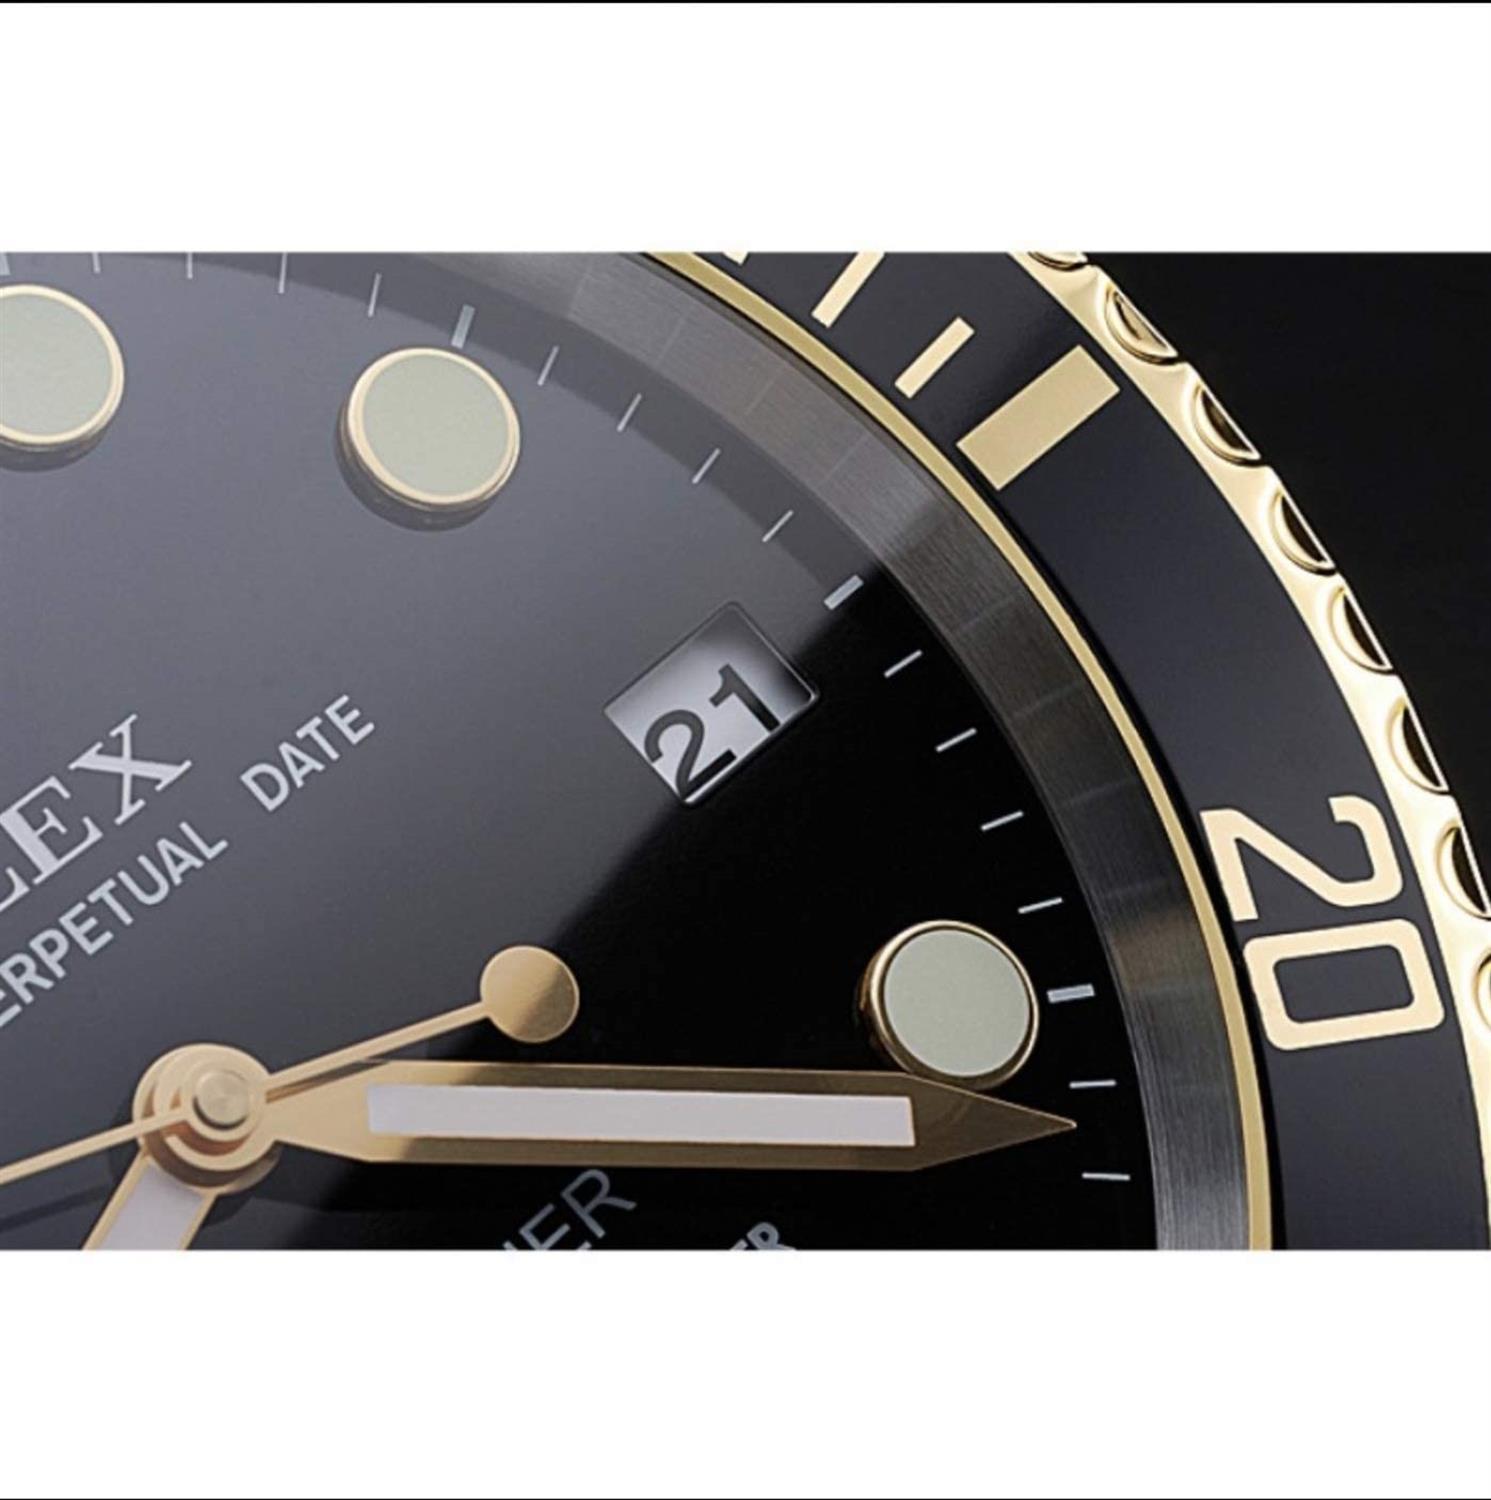 A Rolex Oyster Perpetual Date Submariner Promotional Wall Clock